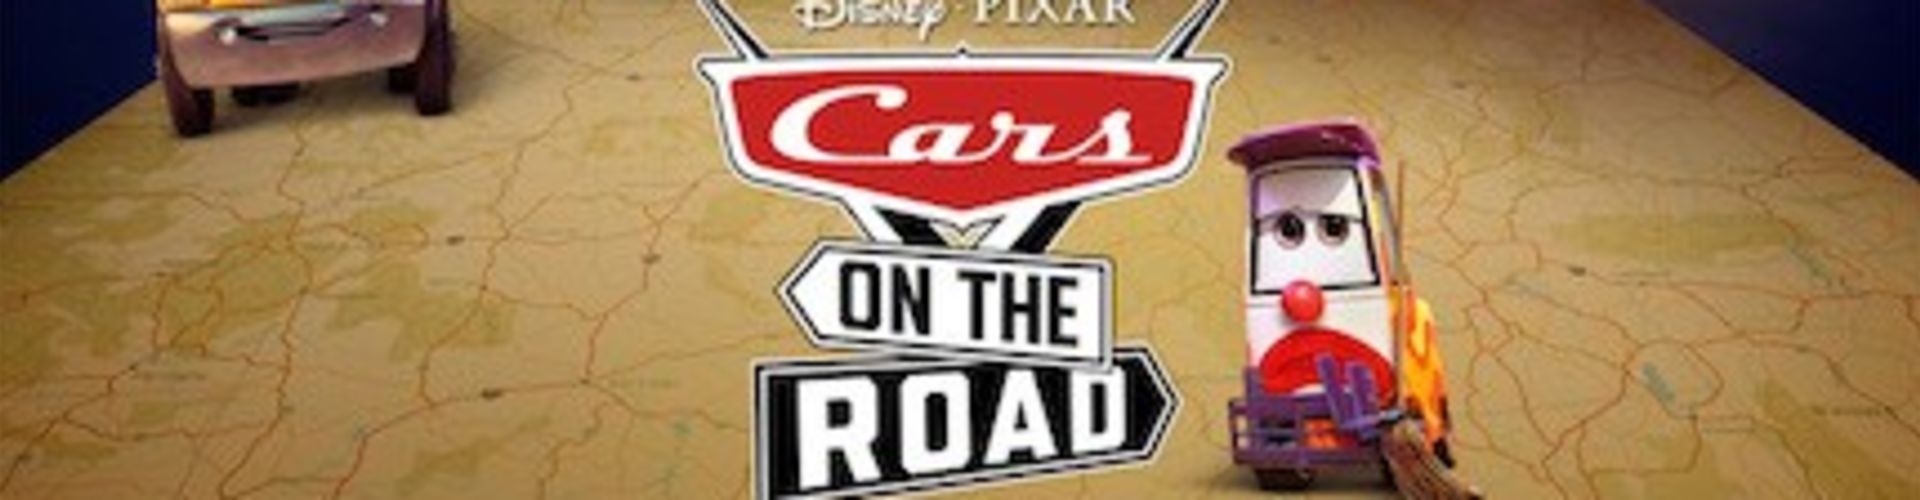 Cars On The Road Trailer Is Out